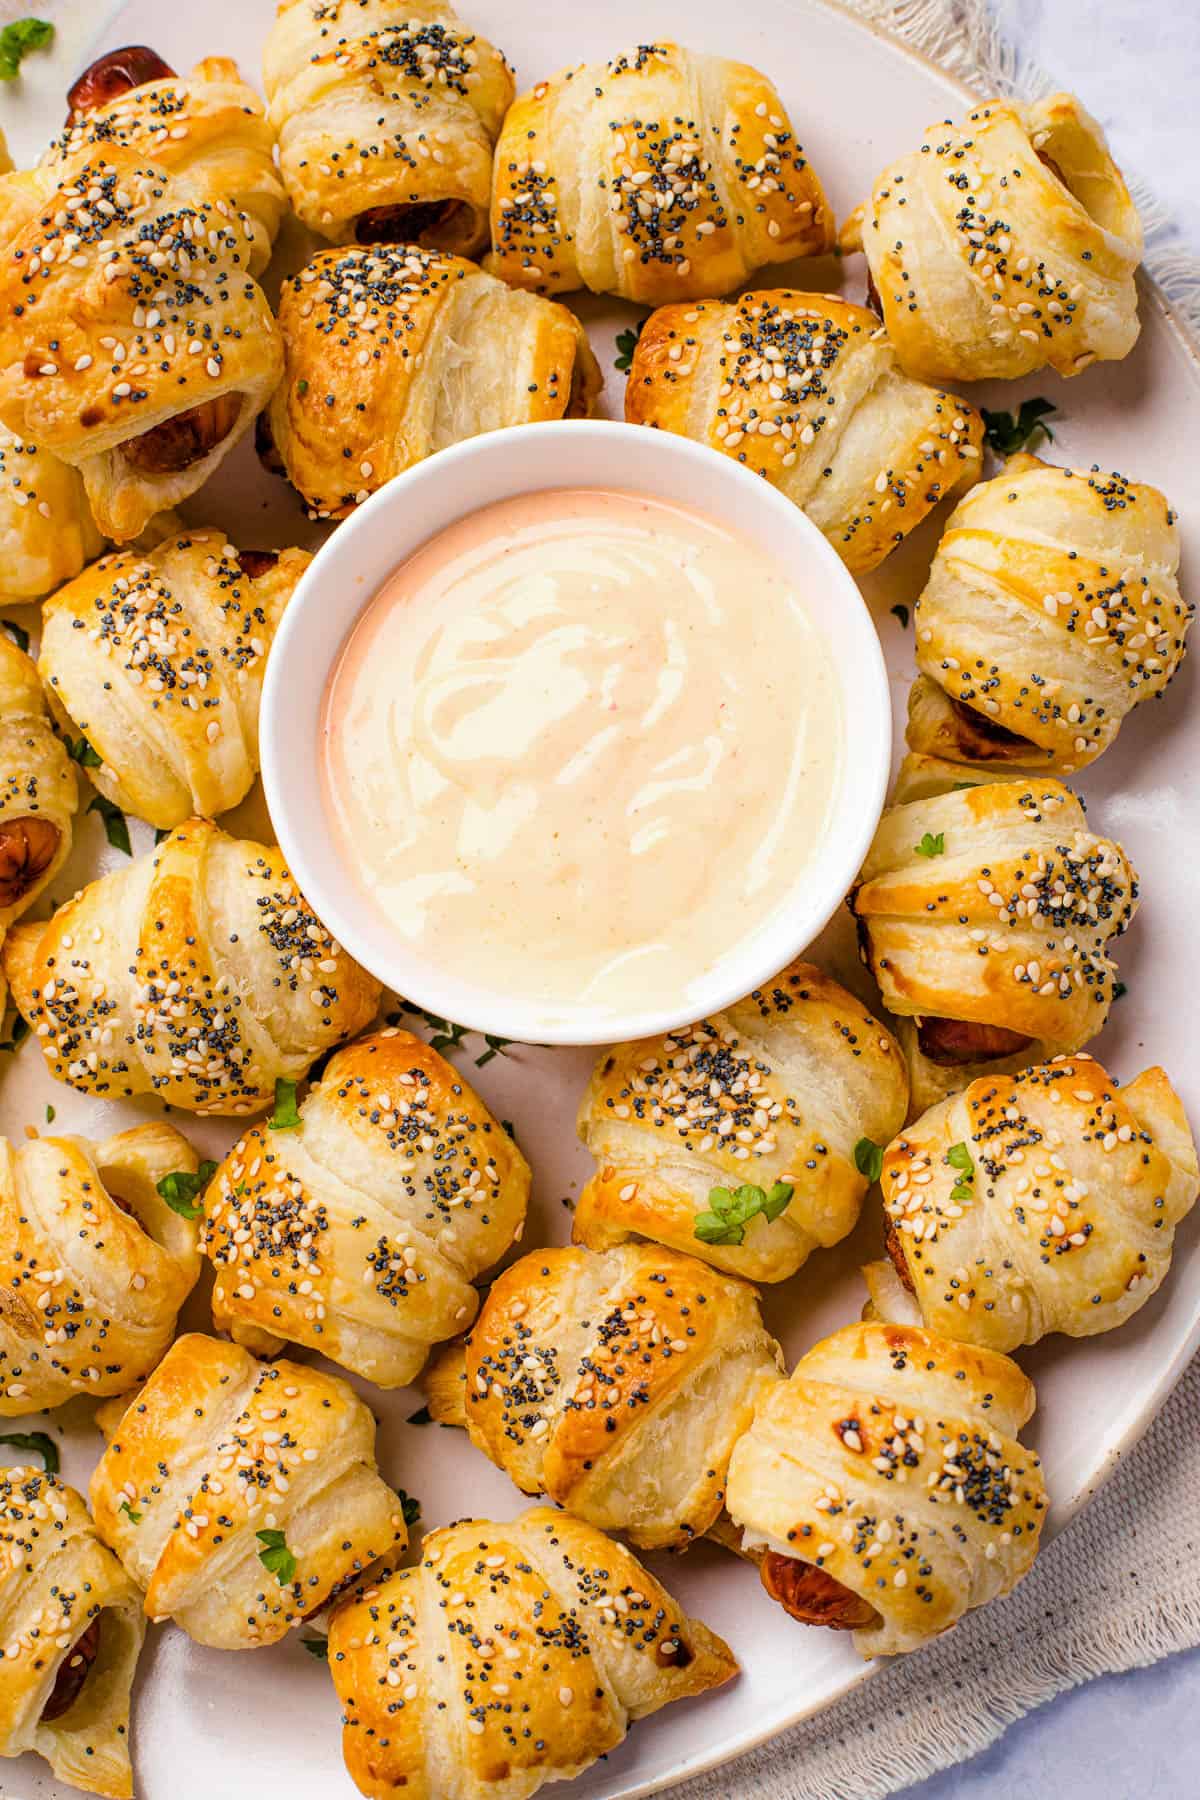 A platter of pigs in a blanket with a bowl of dipping sauce in the center.